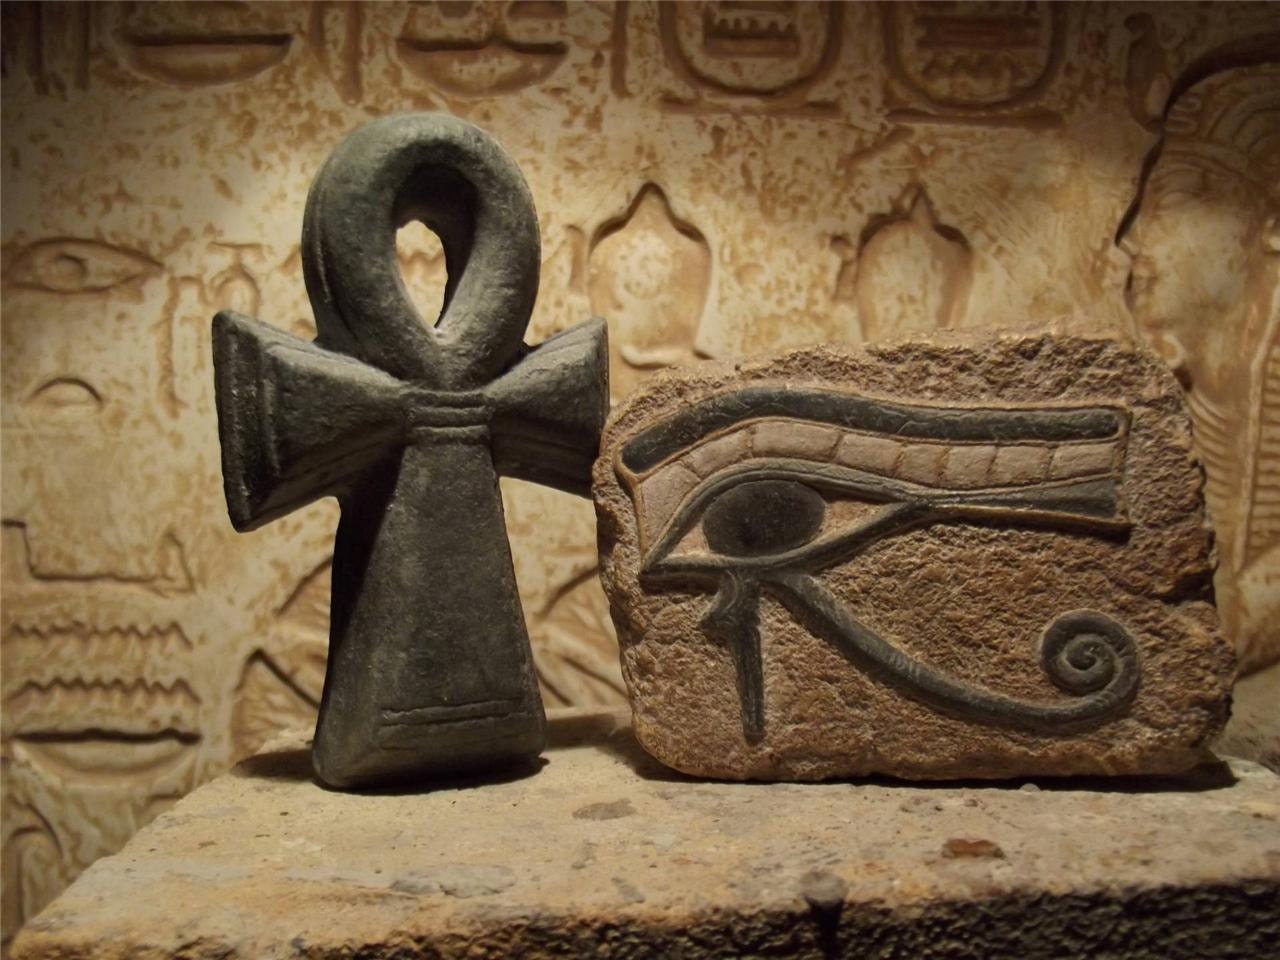 Egyptian Art - Eye of Horus and Ankh amulet. Ancient Egypt carving